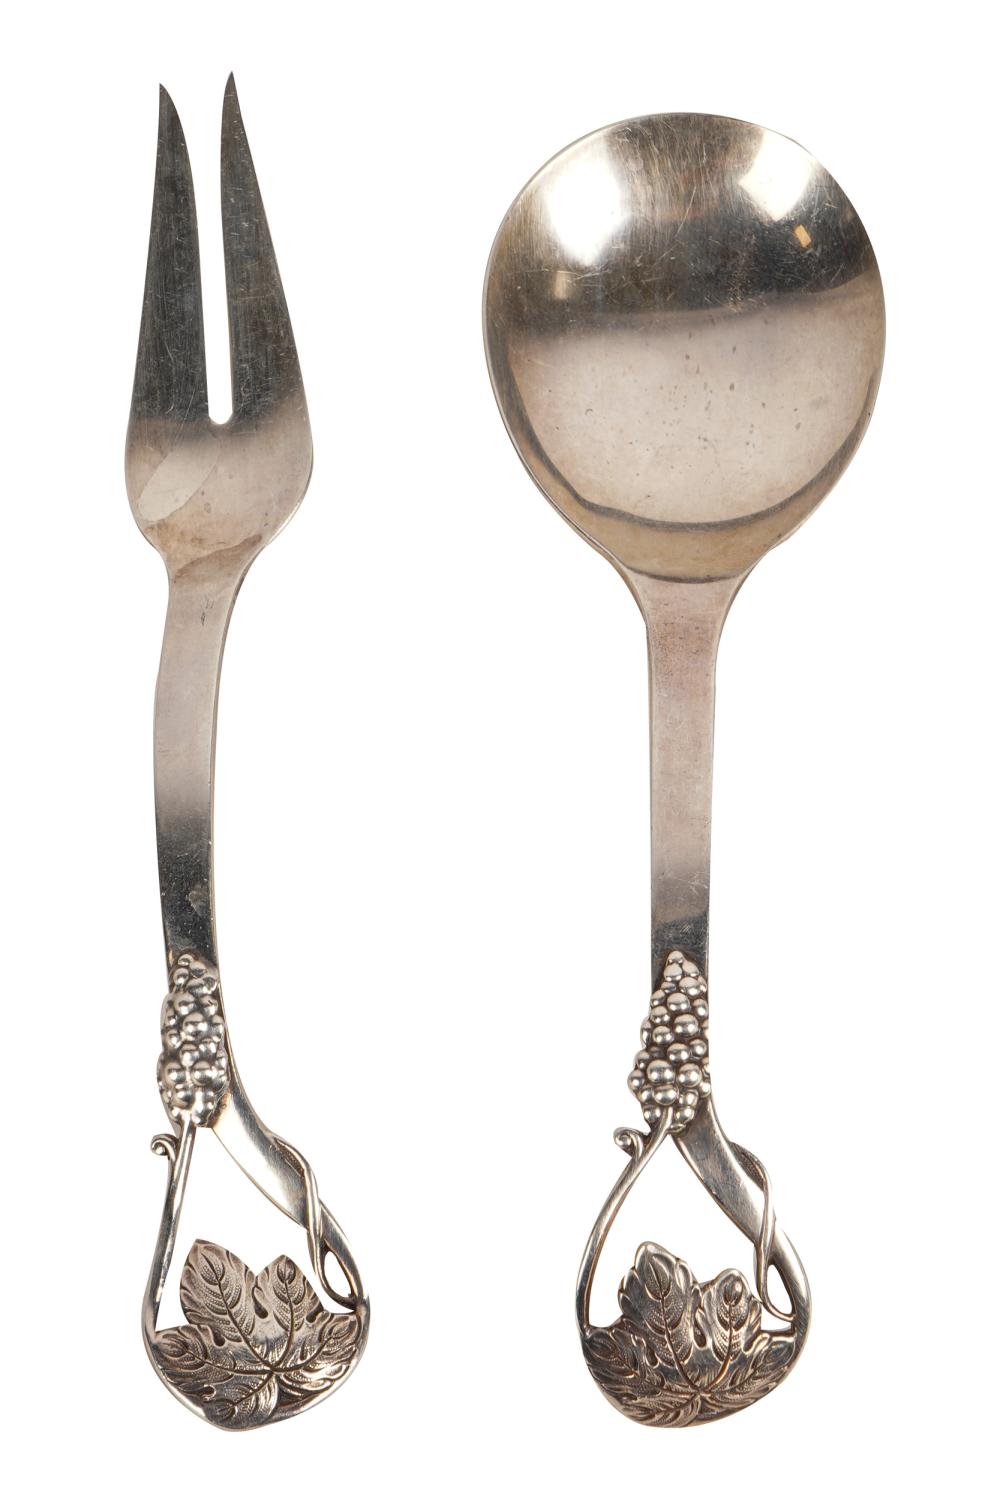 WHITING STERLING TWO -PART SERVING